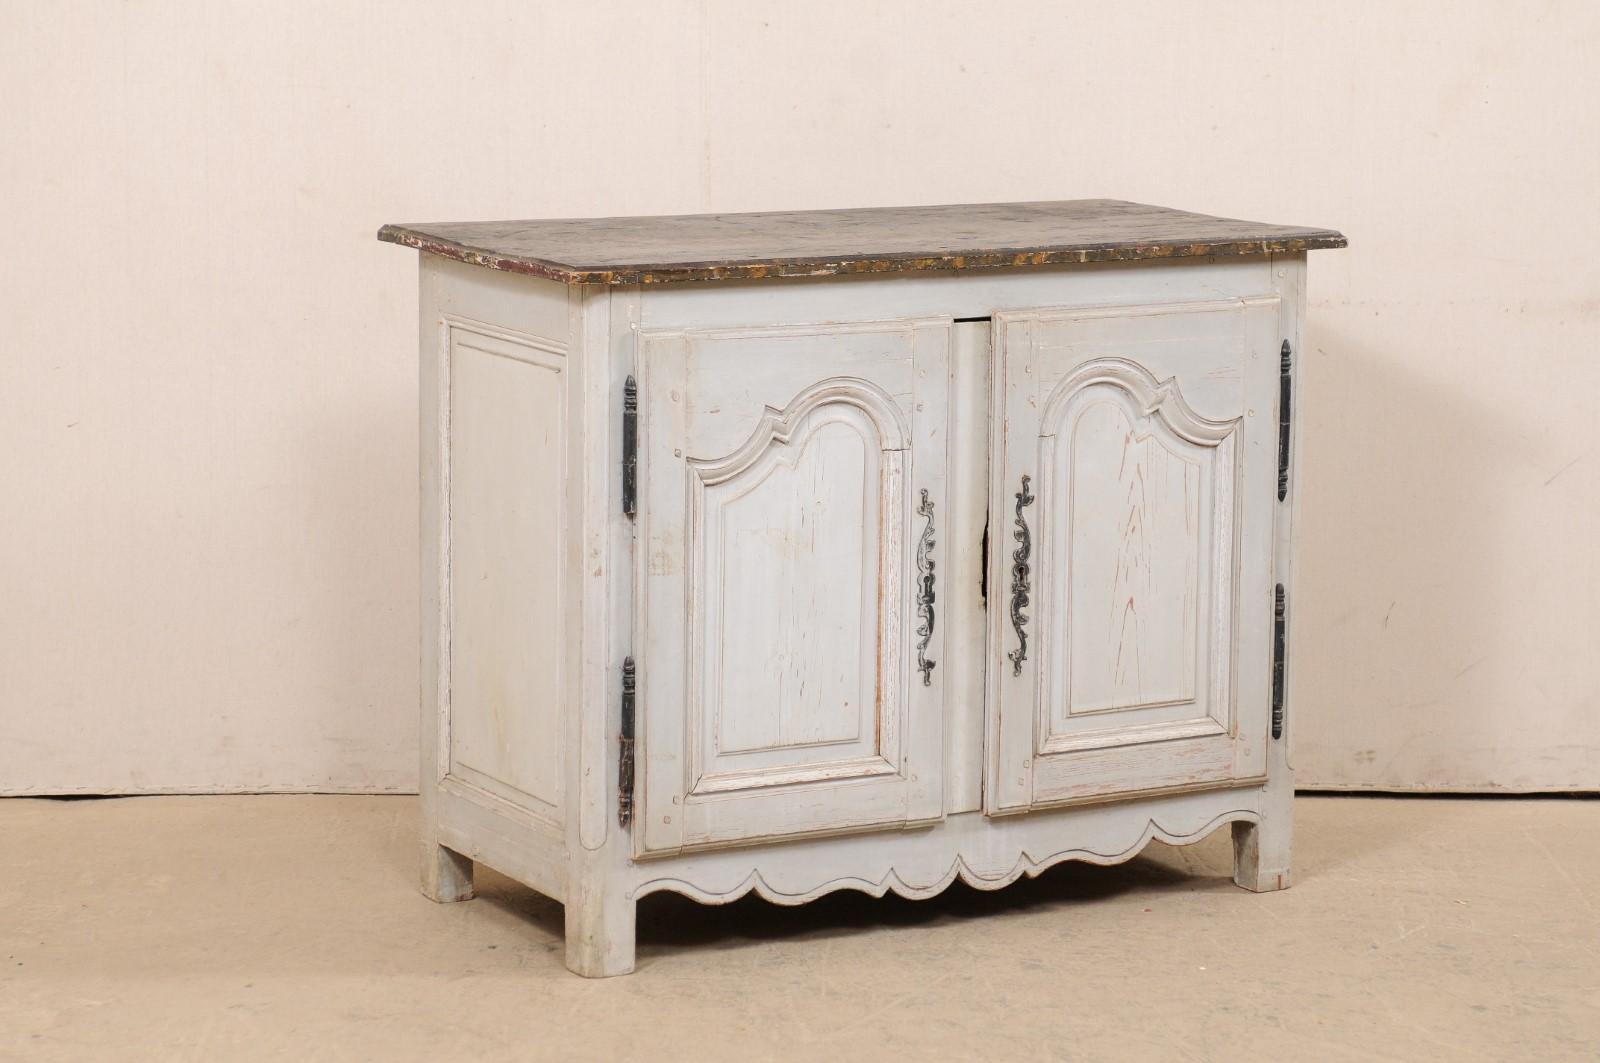 A French painted wood two-door buffet cabinet from the turn of the 18th and 19th century. This antique cabinet from France features a rectangular-shaped top with beveled edges, atop a case which houses a pair of nicely carved panel doors, flanked